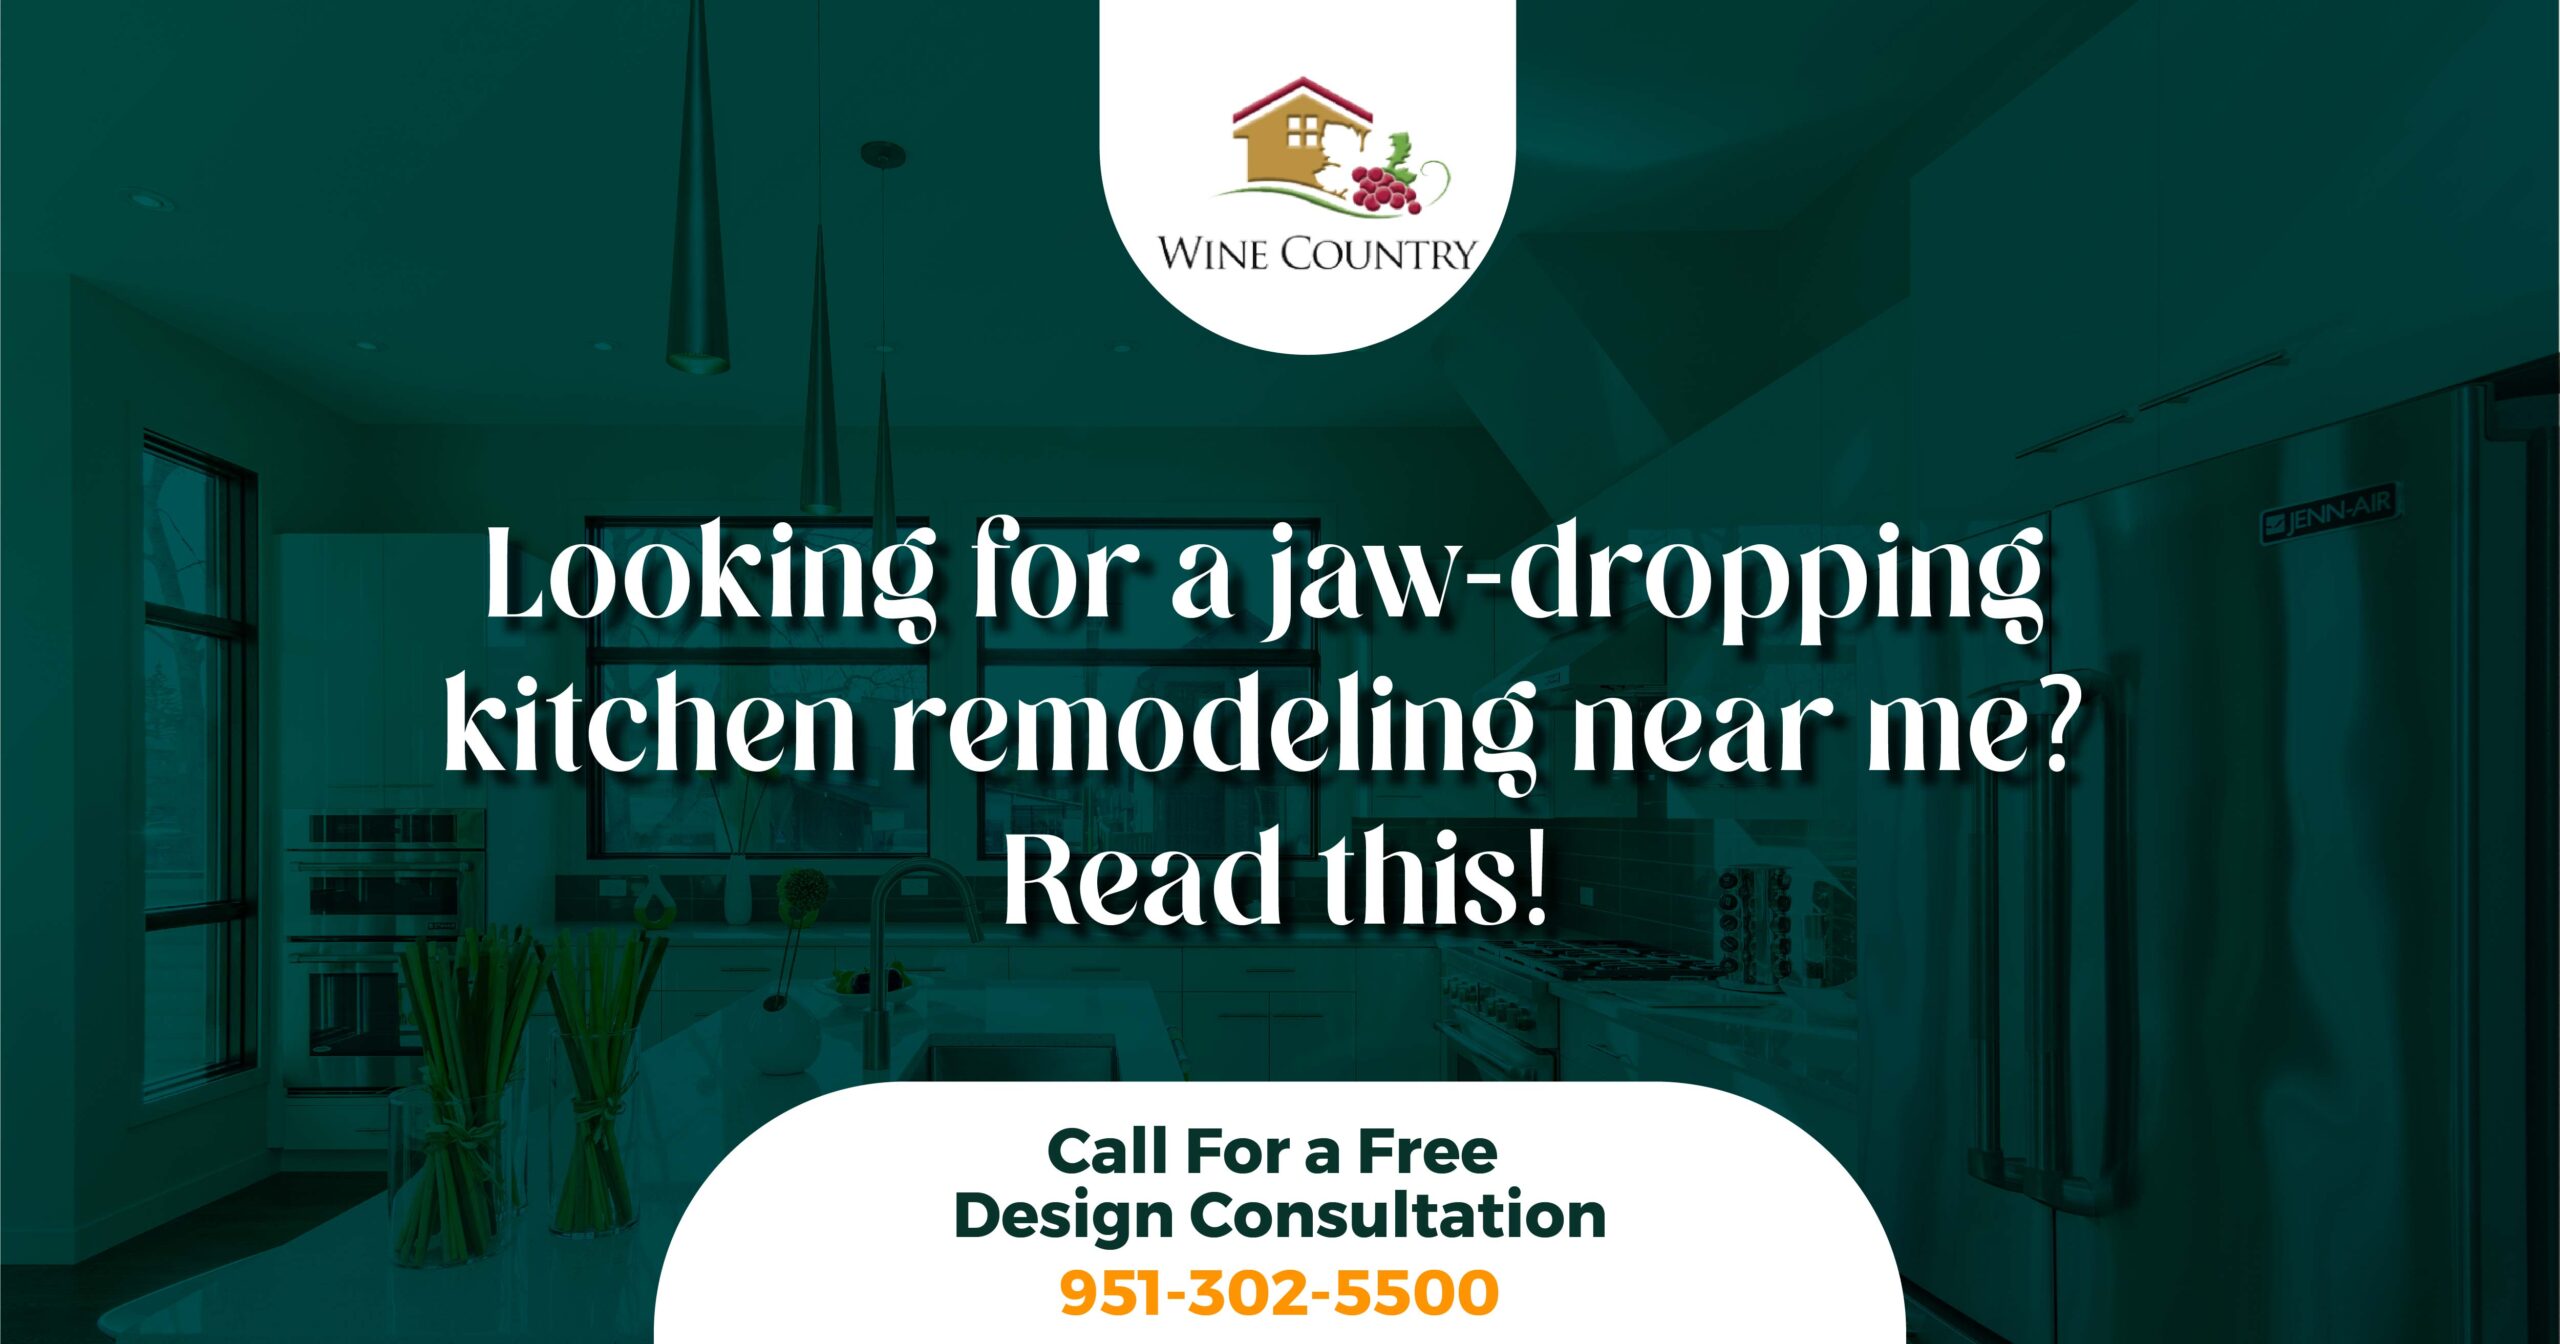 Looking for a jaw-dropping kitchen remodeling near me? Read this!